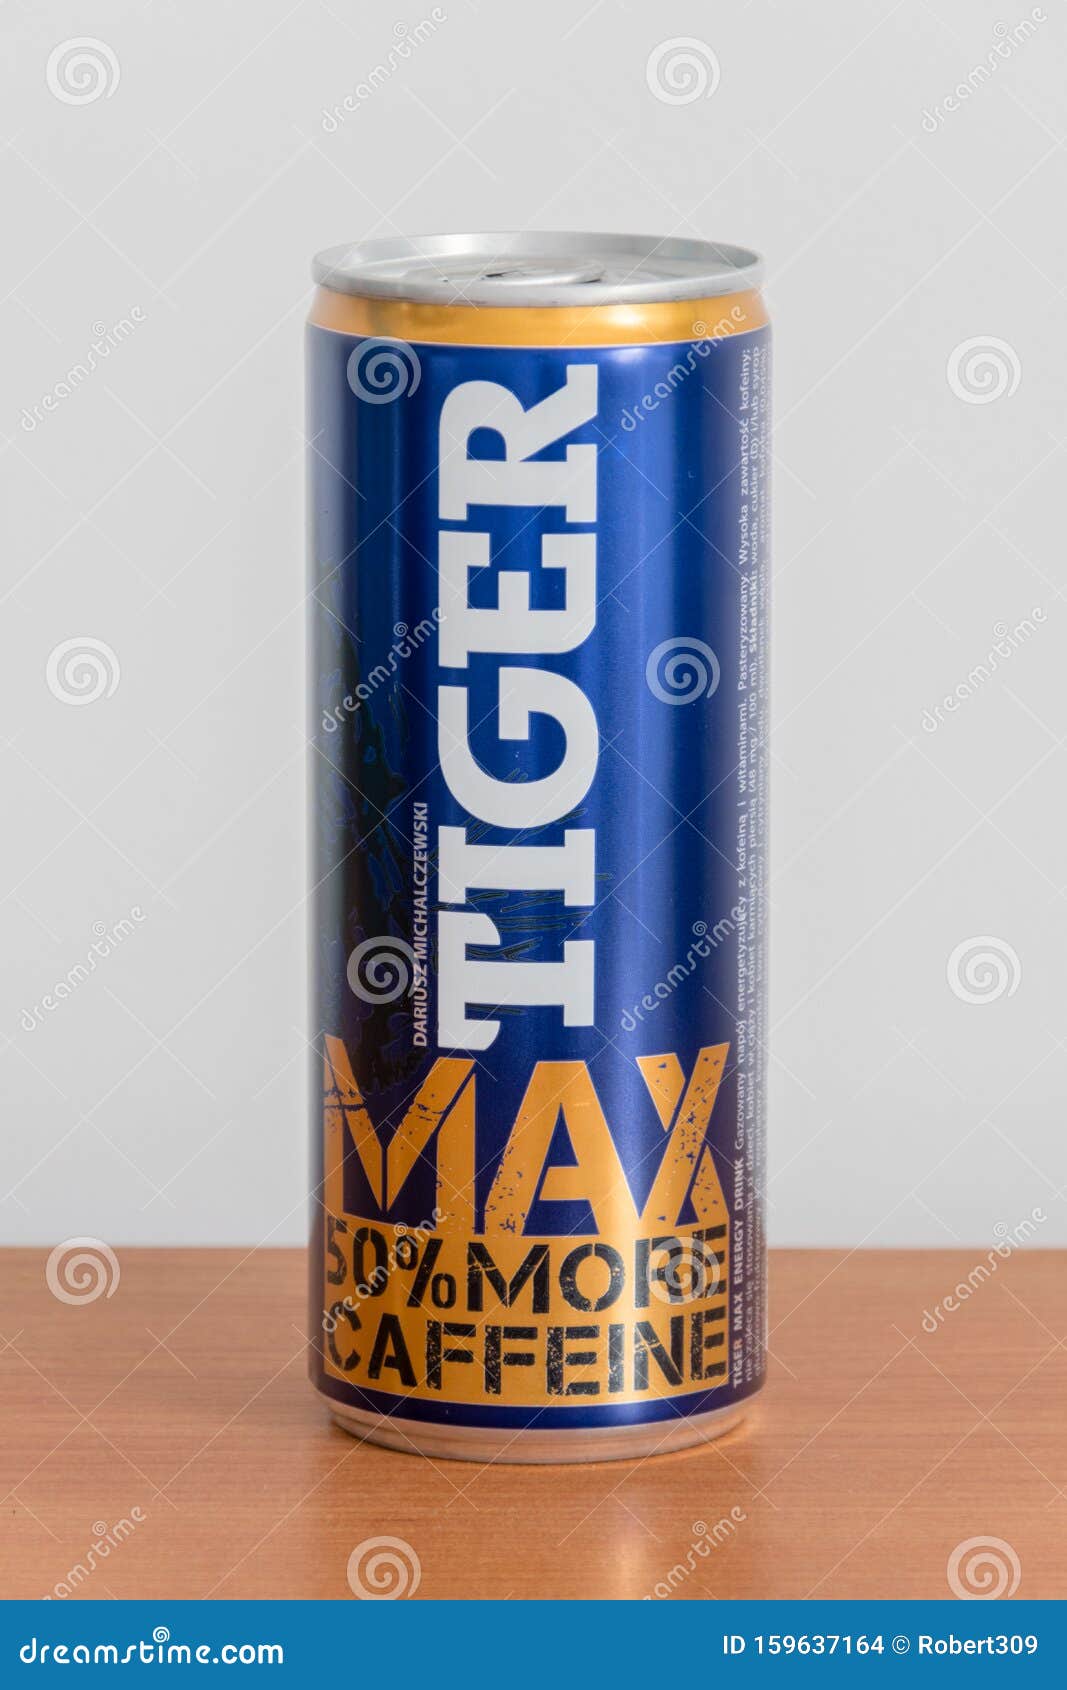 Fluisteren paus Lounge Can of Tiger MAX Energy Drink with 50 More Caffeine Editorial Stock Image -  Image of soft, sweet: 159637164